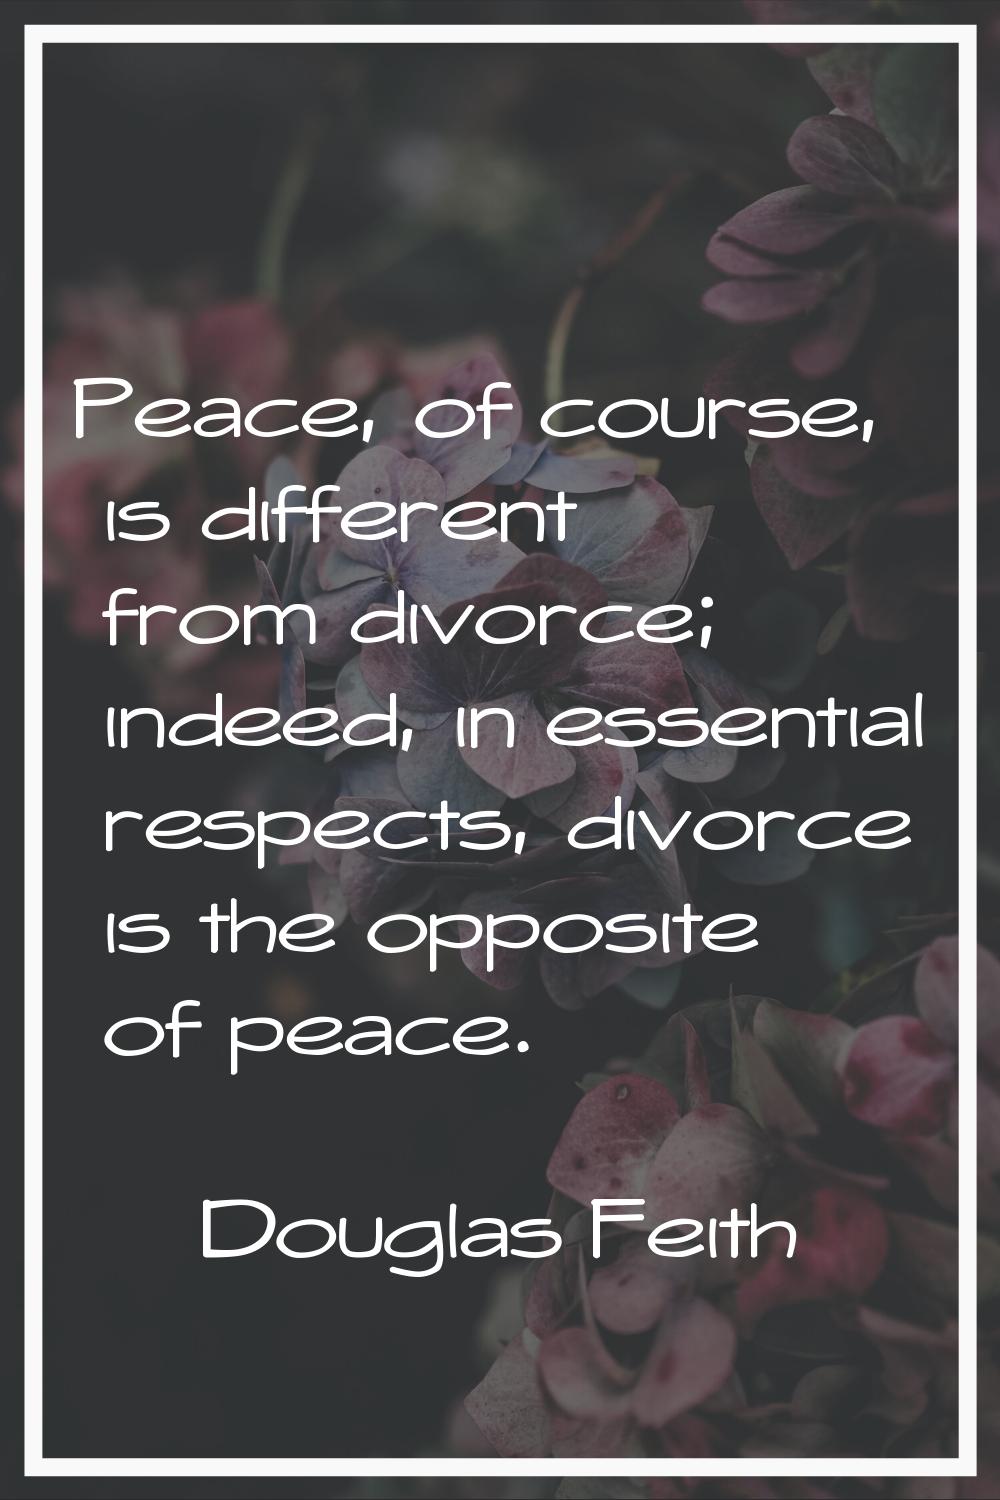 Peace, of course, is different from divorce; indeed, in essential respects, divorce is the opposite